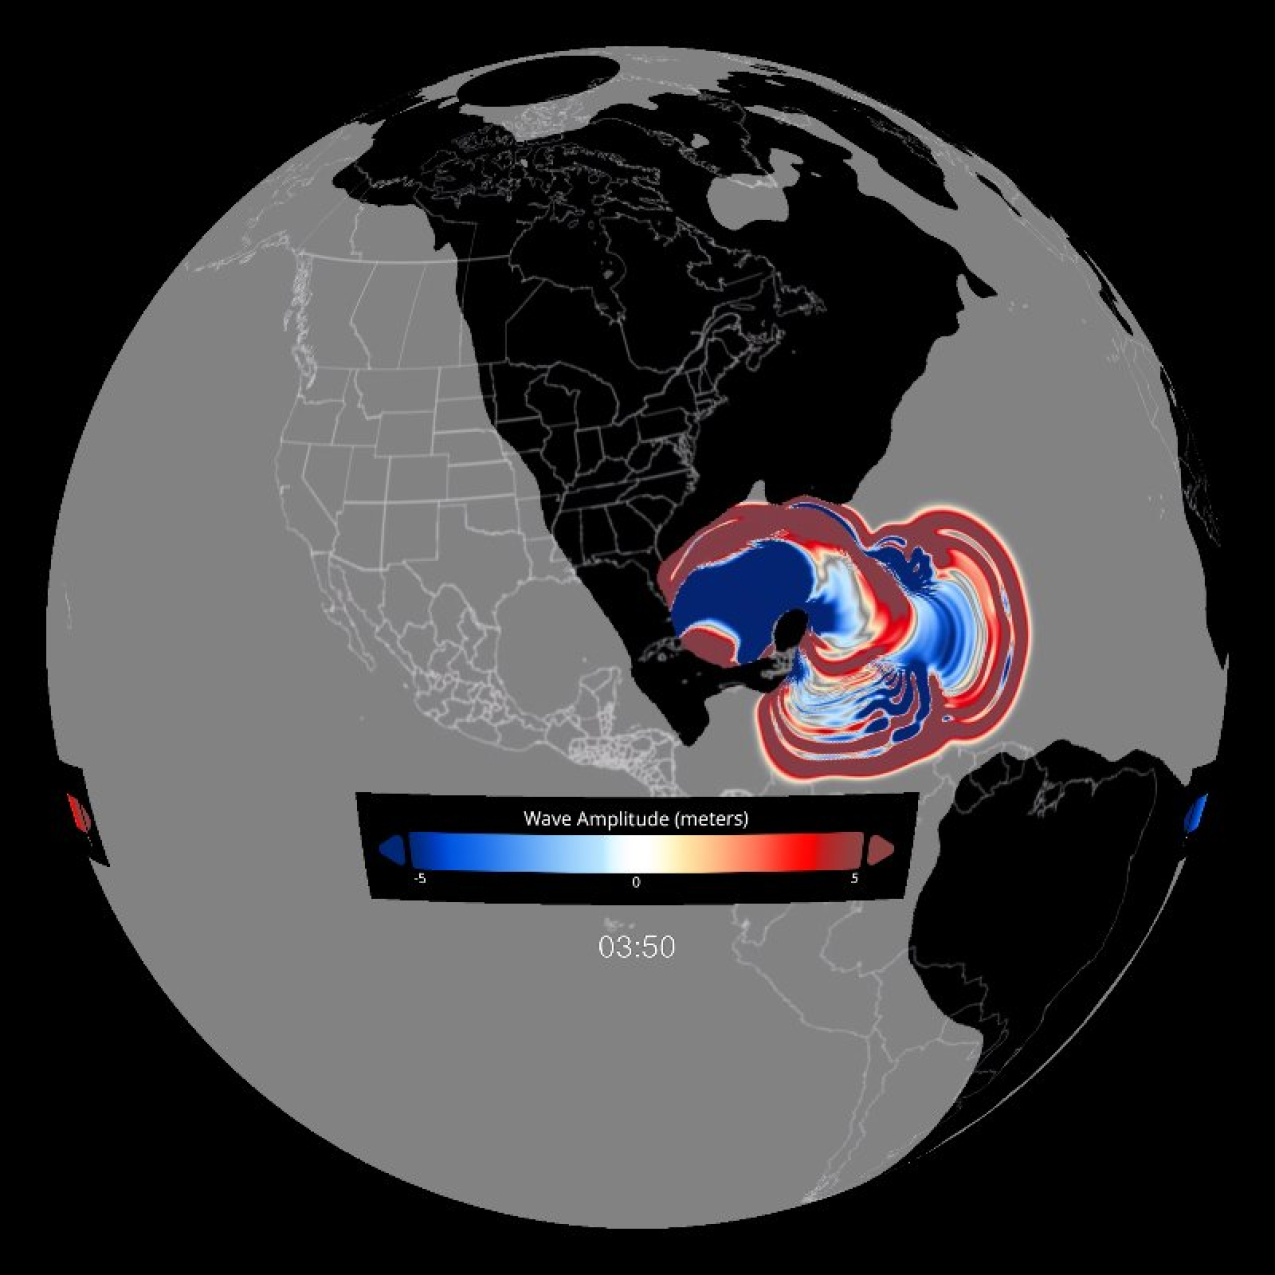 A view of the Earth from 66 million years ago shows a red and blue wave propagating out from the point of impact of an asteroid near the Yucatan Peninsula. The colors are associated with both positive (red) and negative (blue) wave amplitudes. As time goes on, the wave spreads around the globe